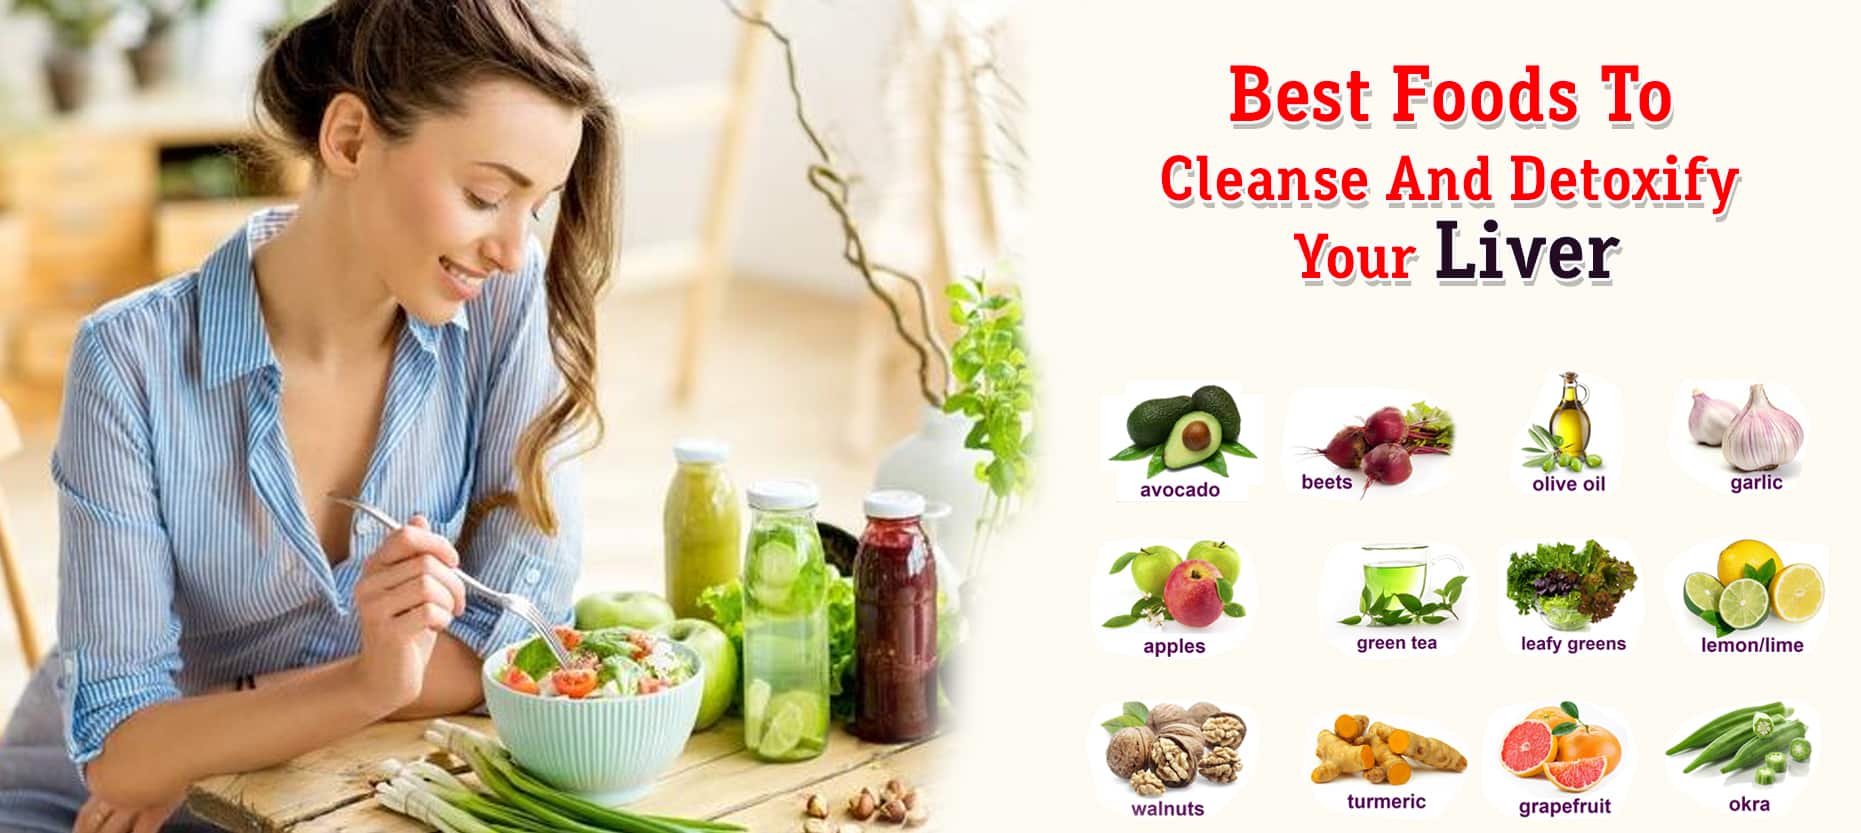 Best Foods to Cleanse and Detoxify your Liver